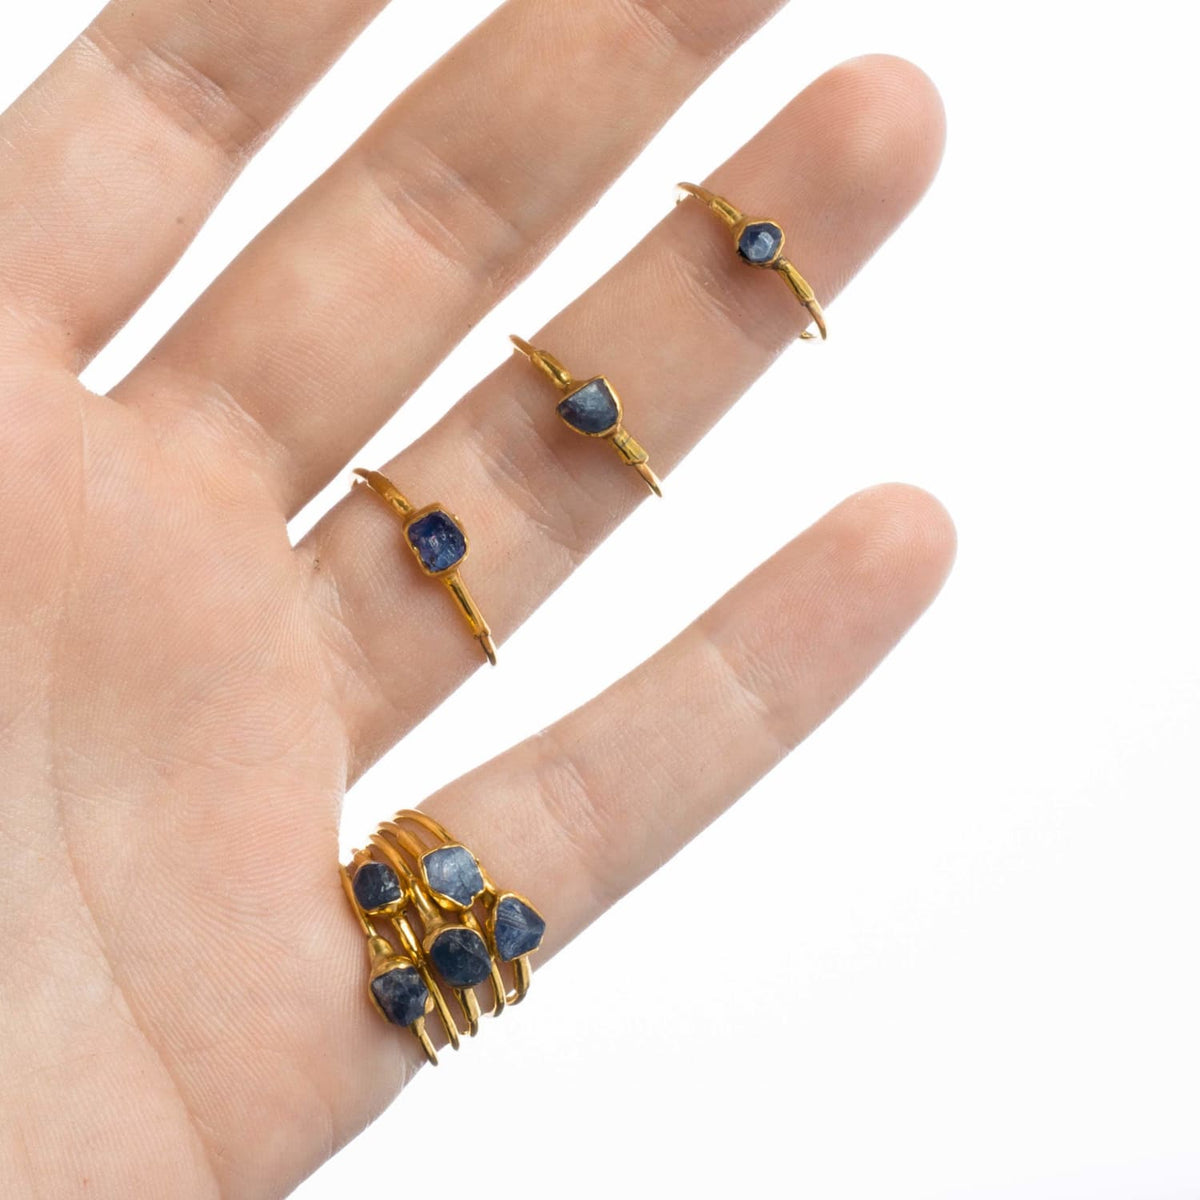 Mini Raw Sapphire Ring • Gold Filled • Dainty Unique